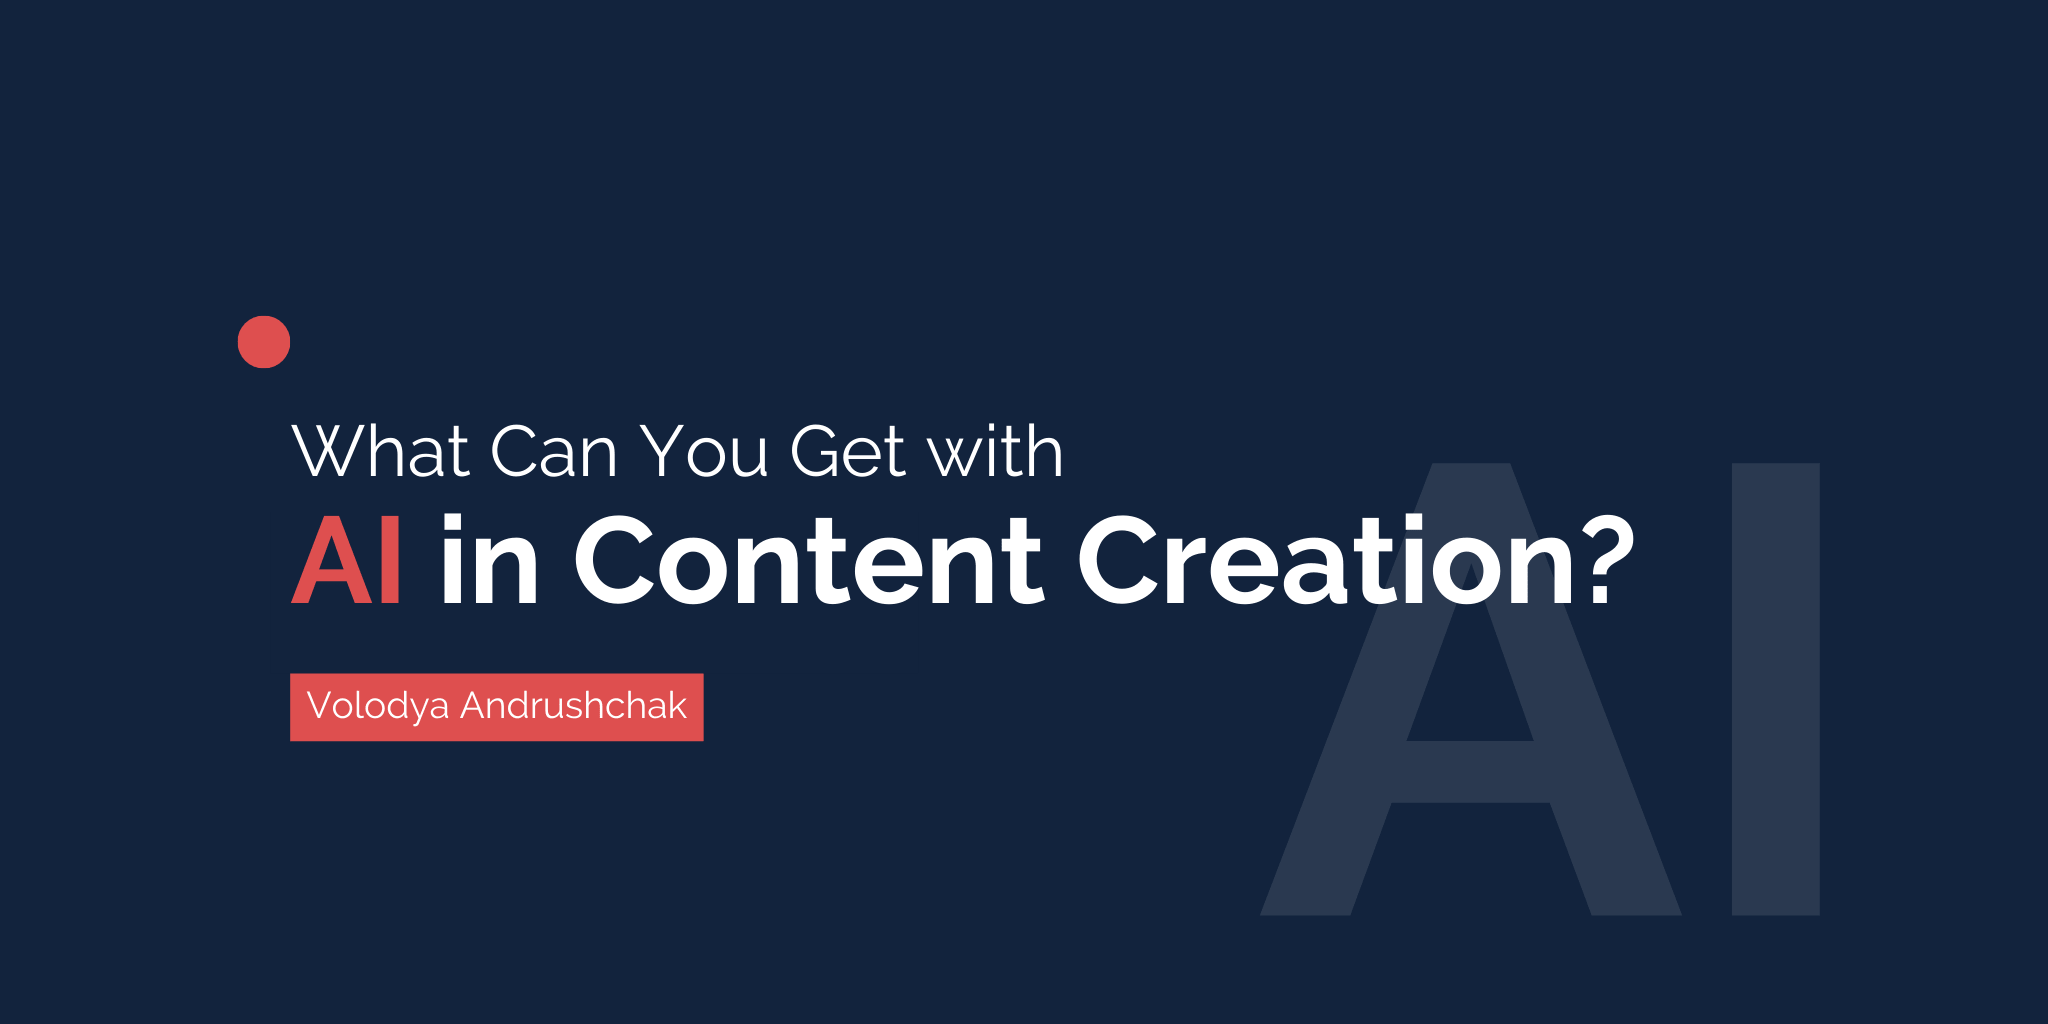 What Can You Get with AI in Content Creation?